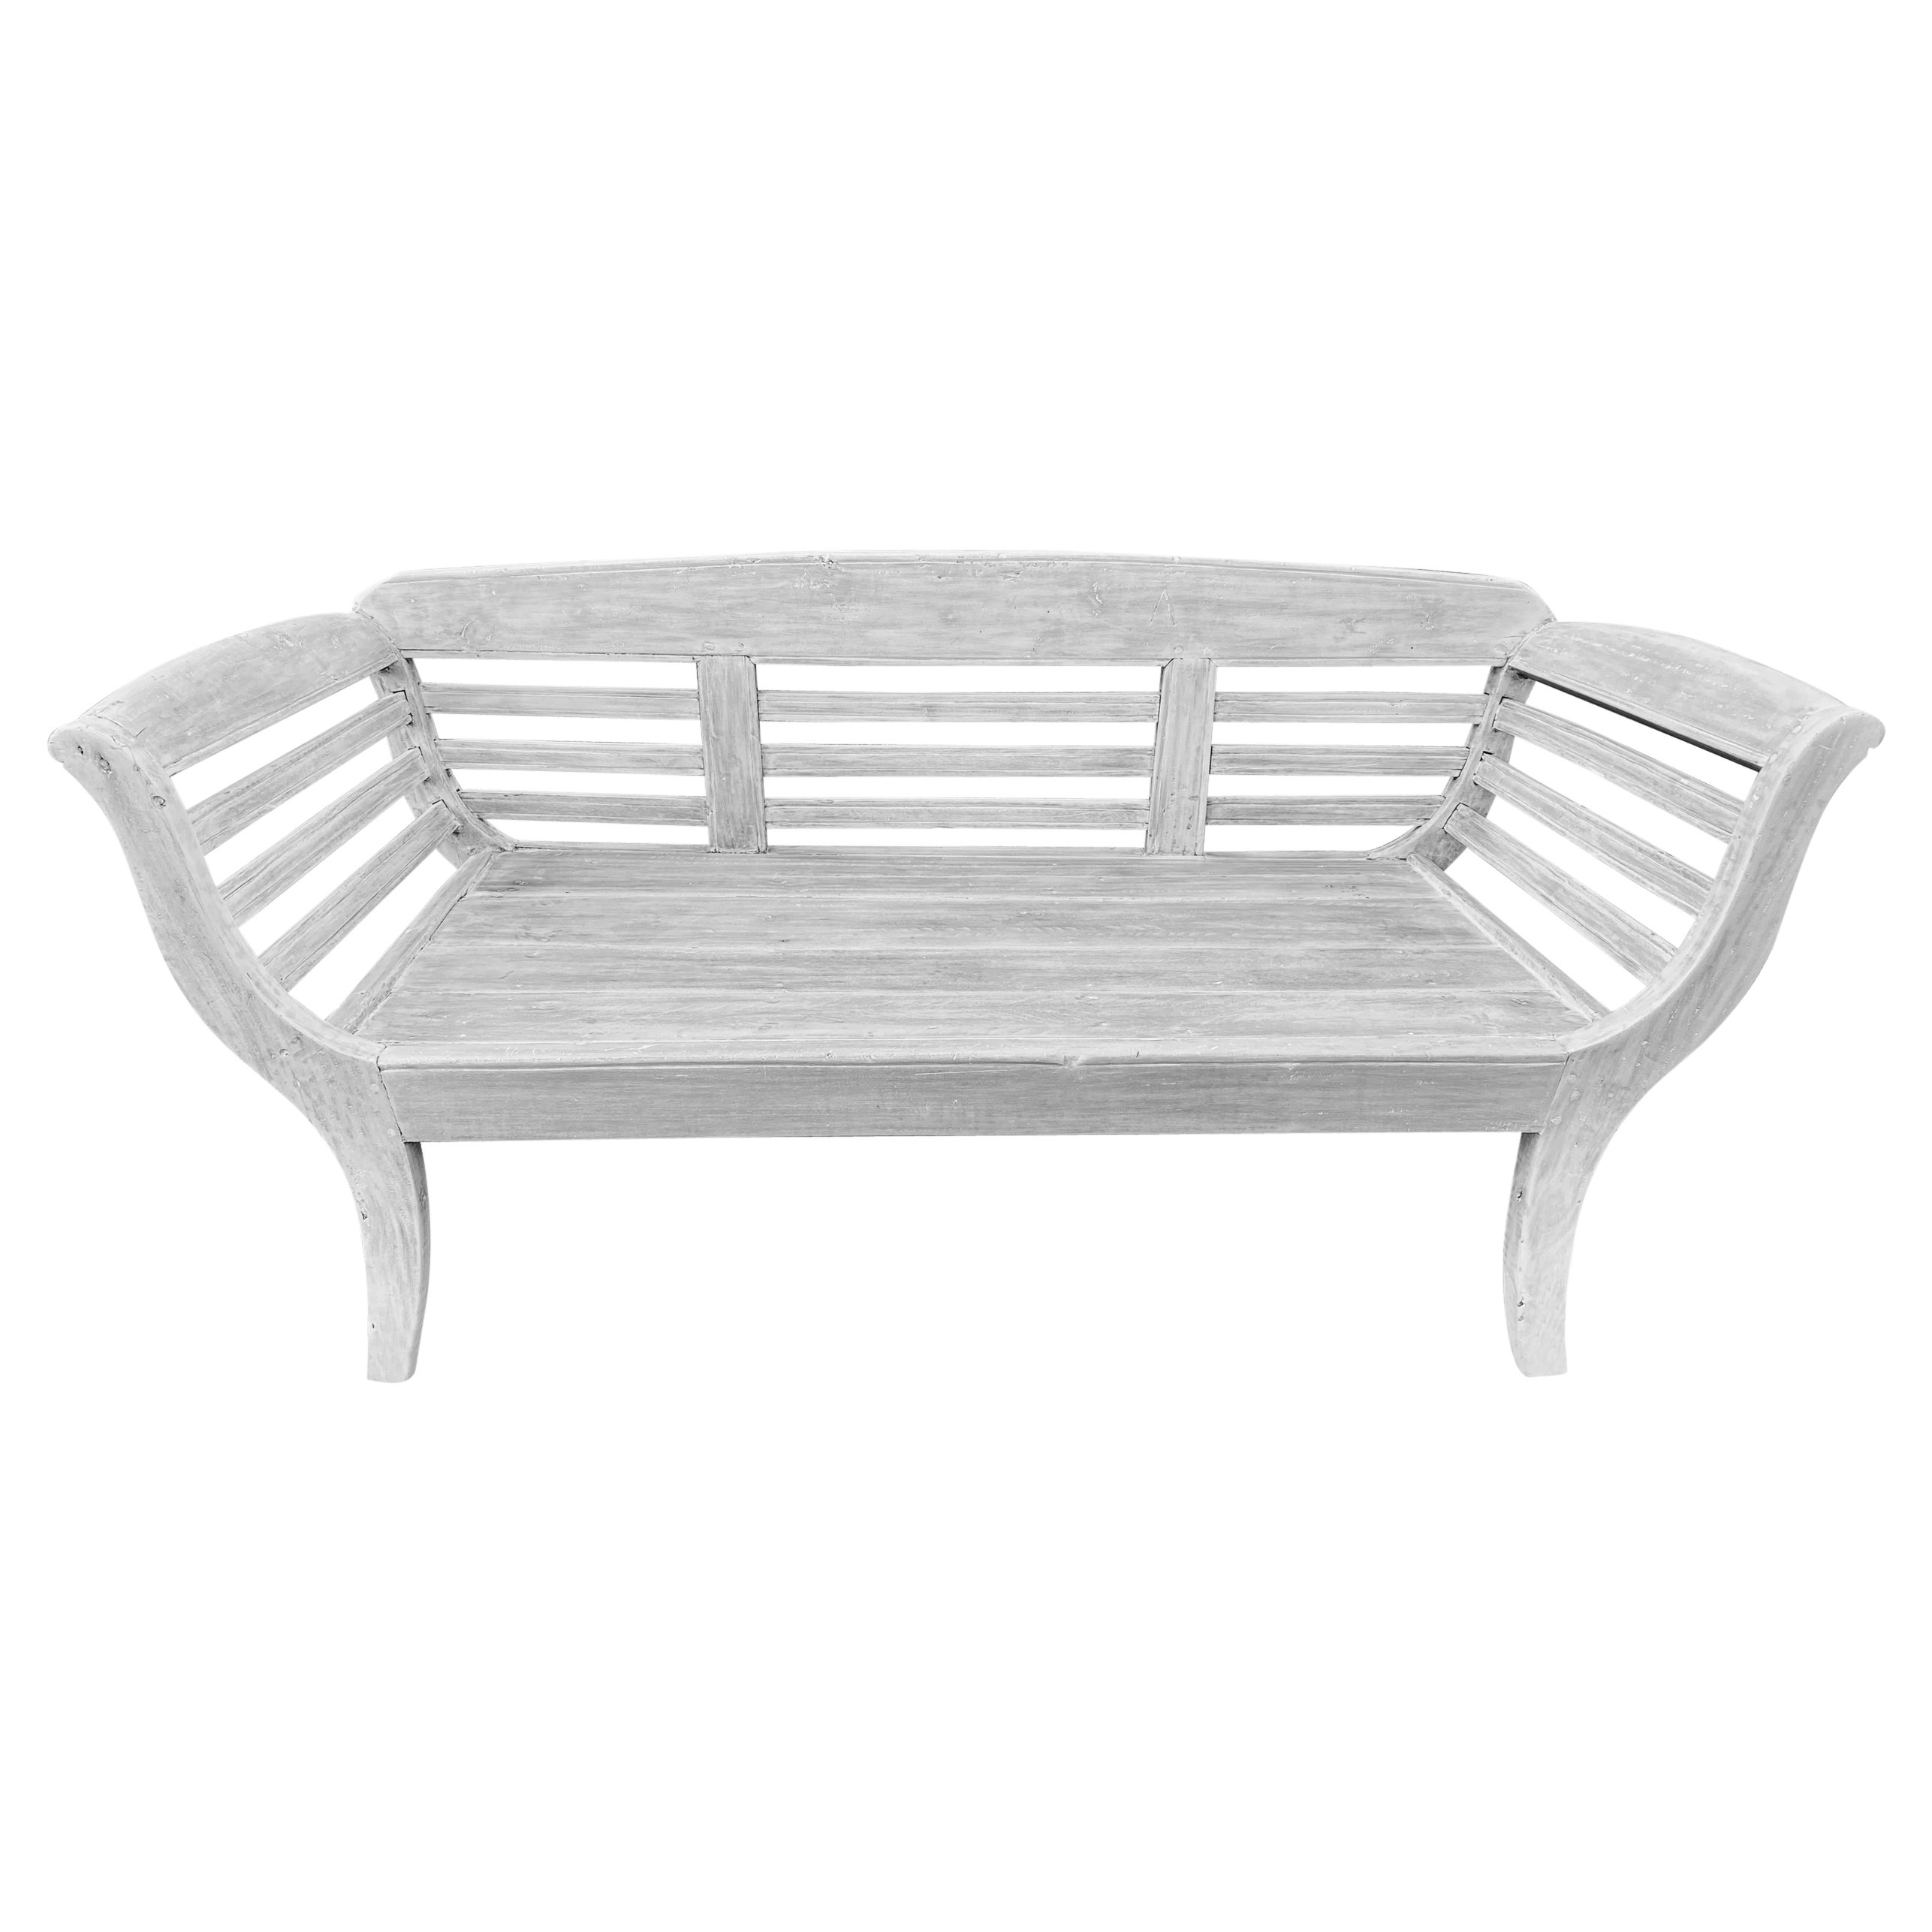 Antique White Washed Teak Settee or Bench with Slatted Back For Sale